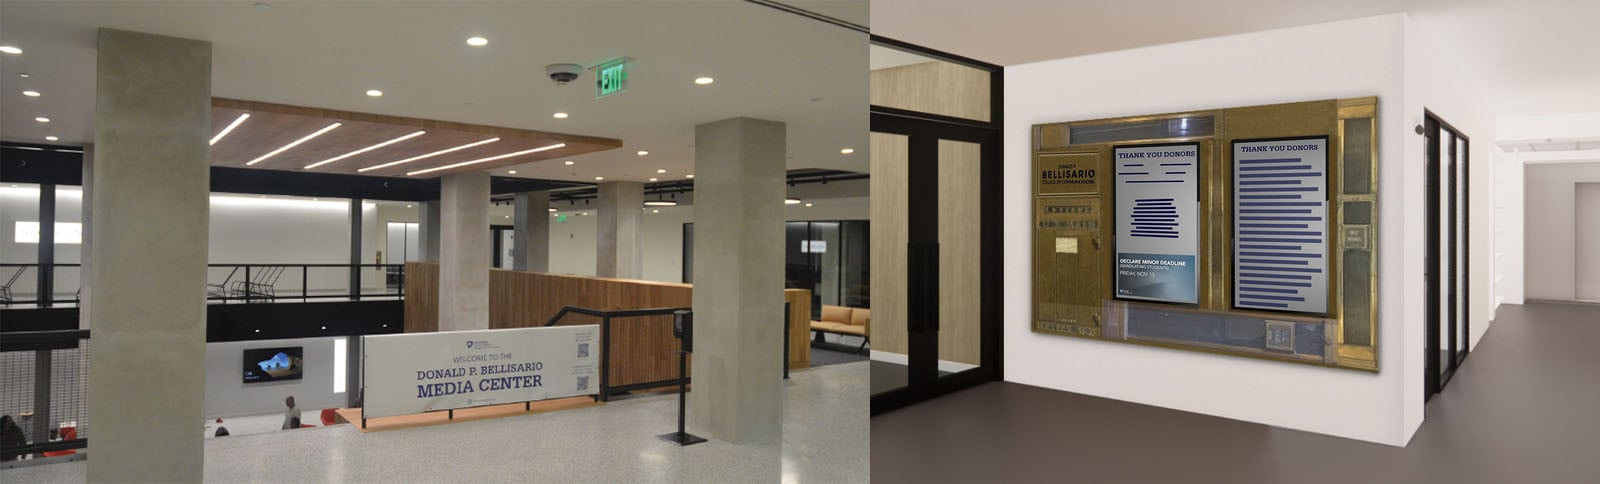 Composite photo showing the interior of the new Bellisario Media Center on the left and a rendering of the electronic donor recognition wall on the right.